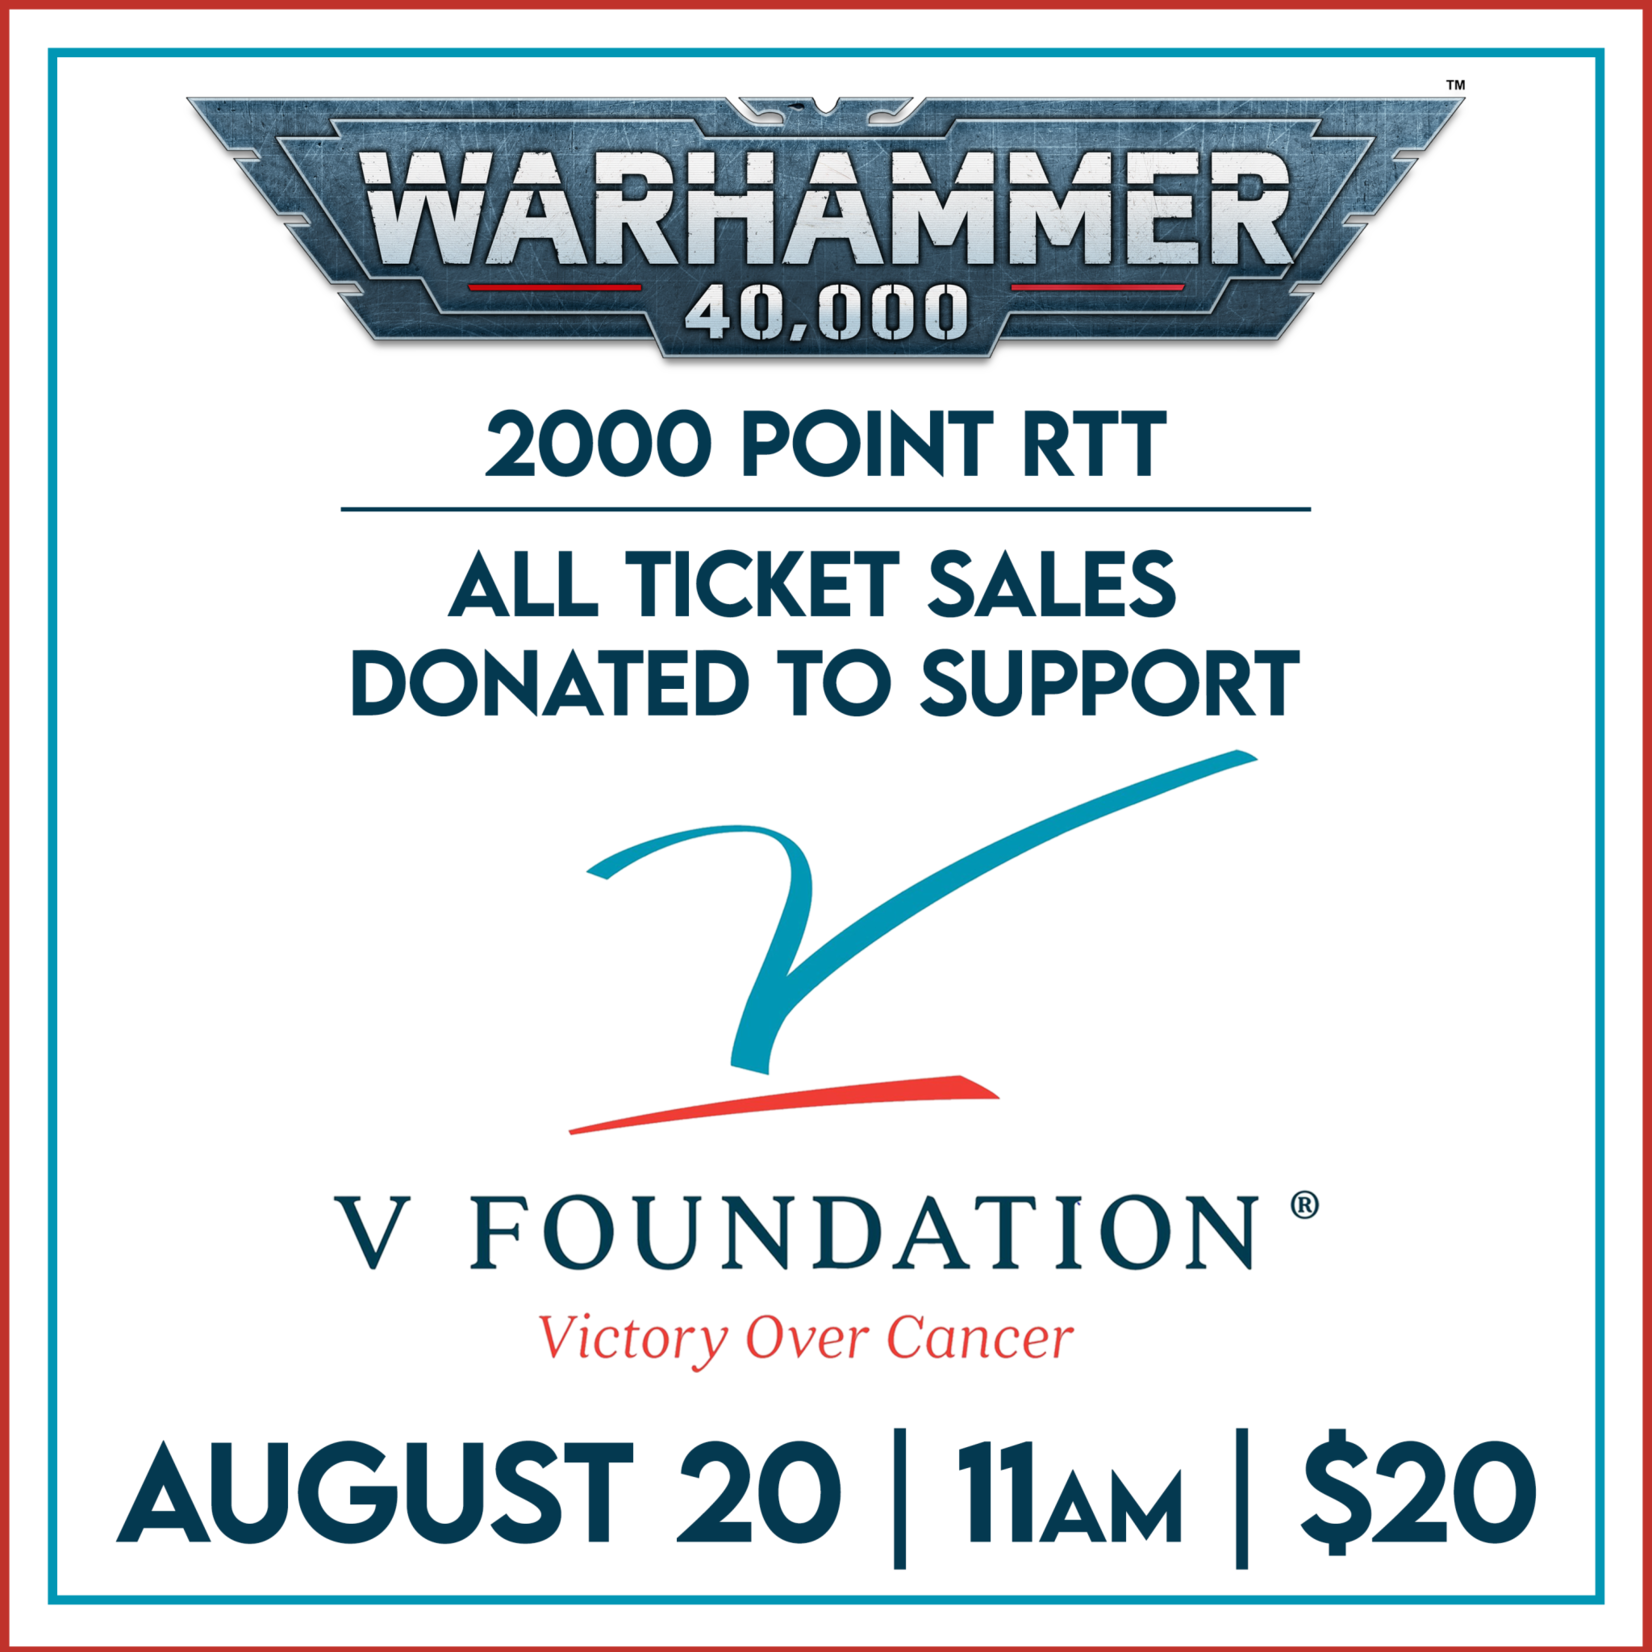 08/20 @ 10:30 AM - Warhammer 40k 2,000 point RTT benefitting the V Foundation for Cancer Research